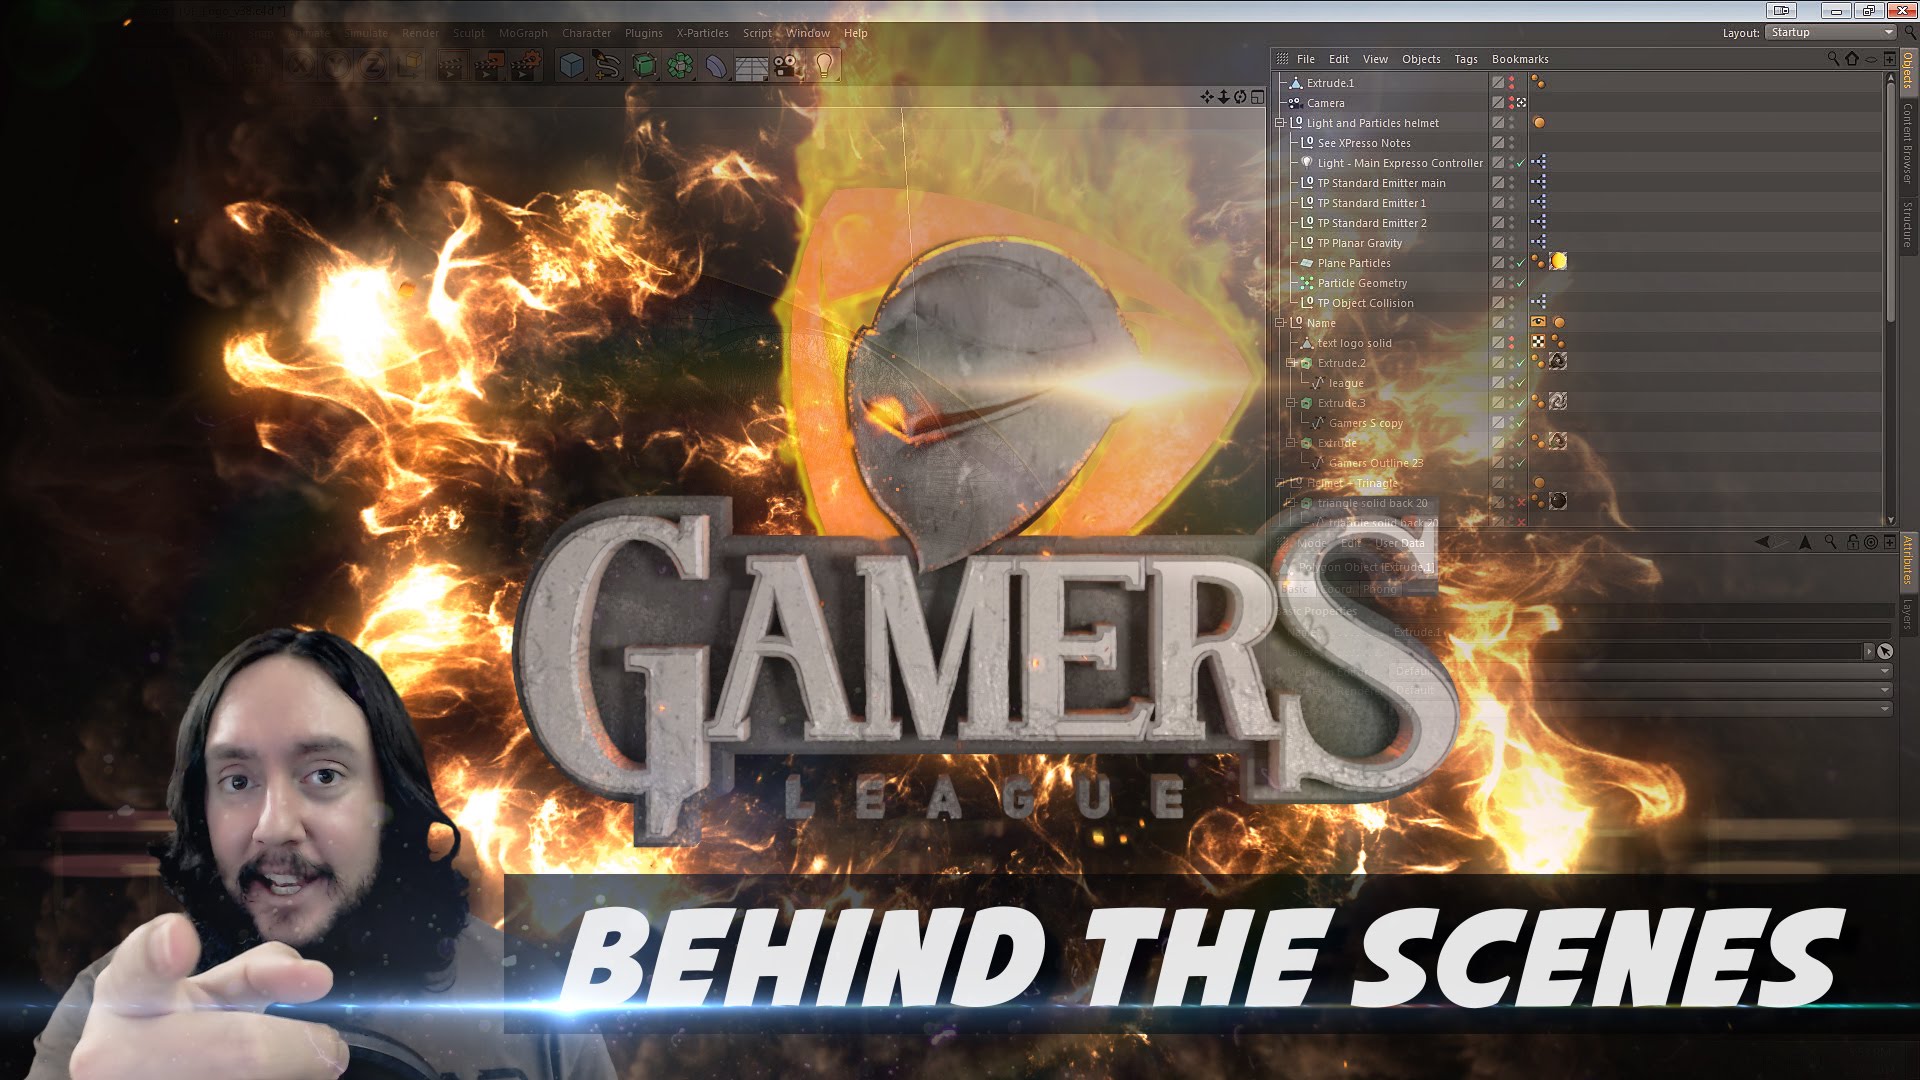 Gamers League Epic Fire Intro: Behind the Scenes C4D & AE [by Psynaps]